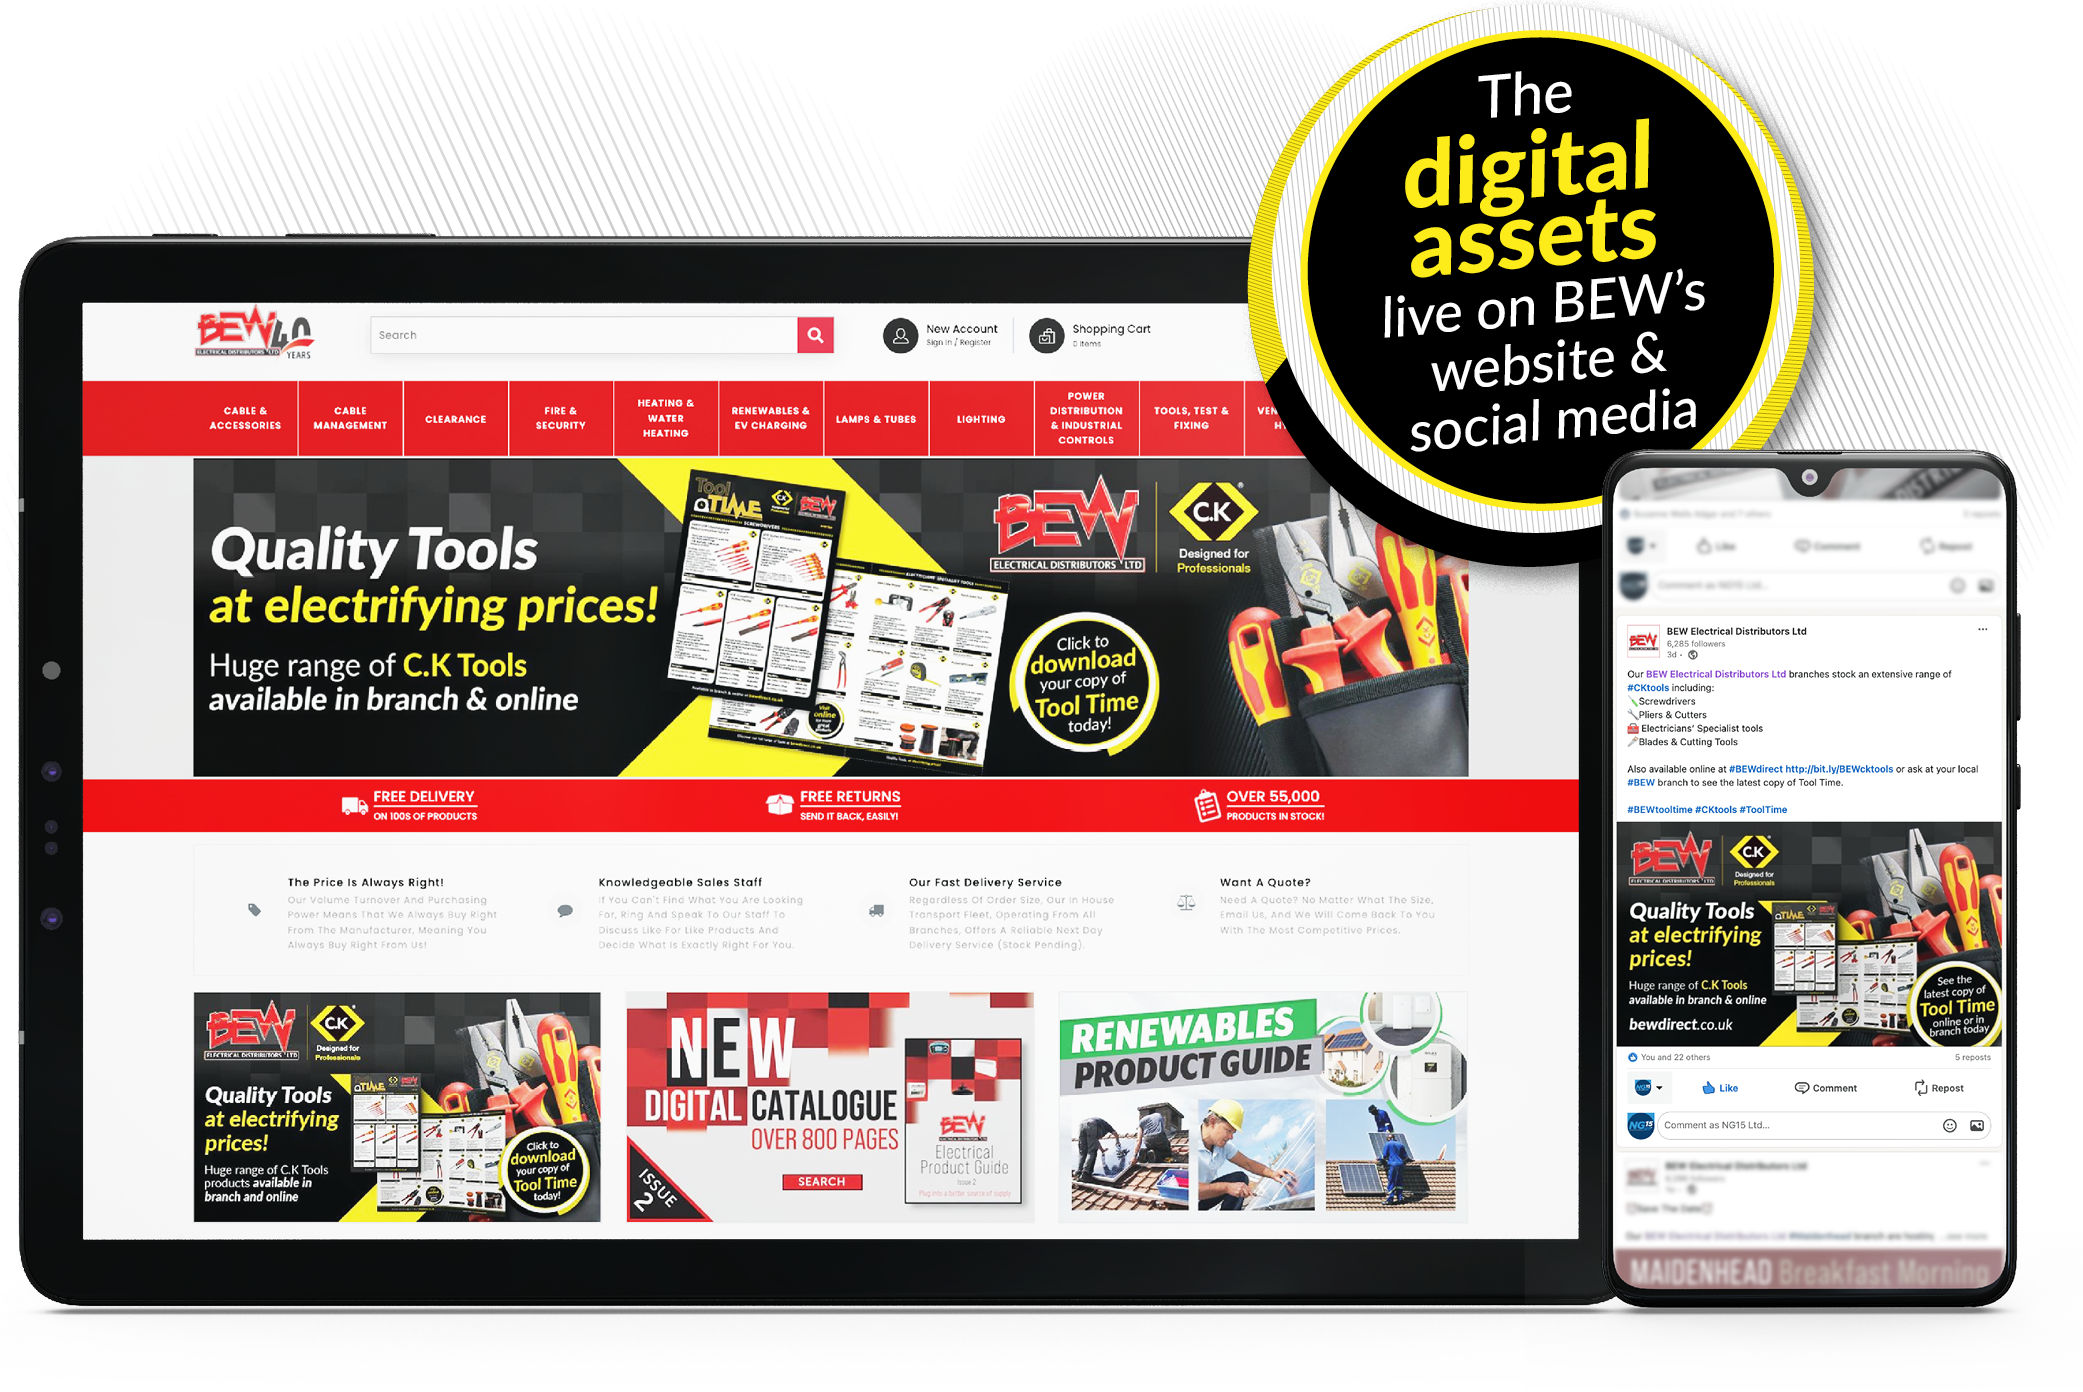 'Tool Time' campaign digital assets featured on BEW's website homepage and Social Media.